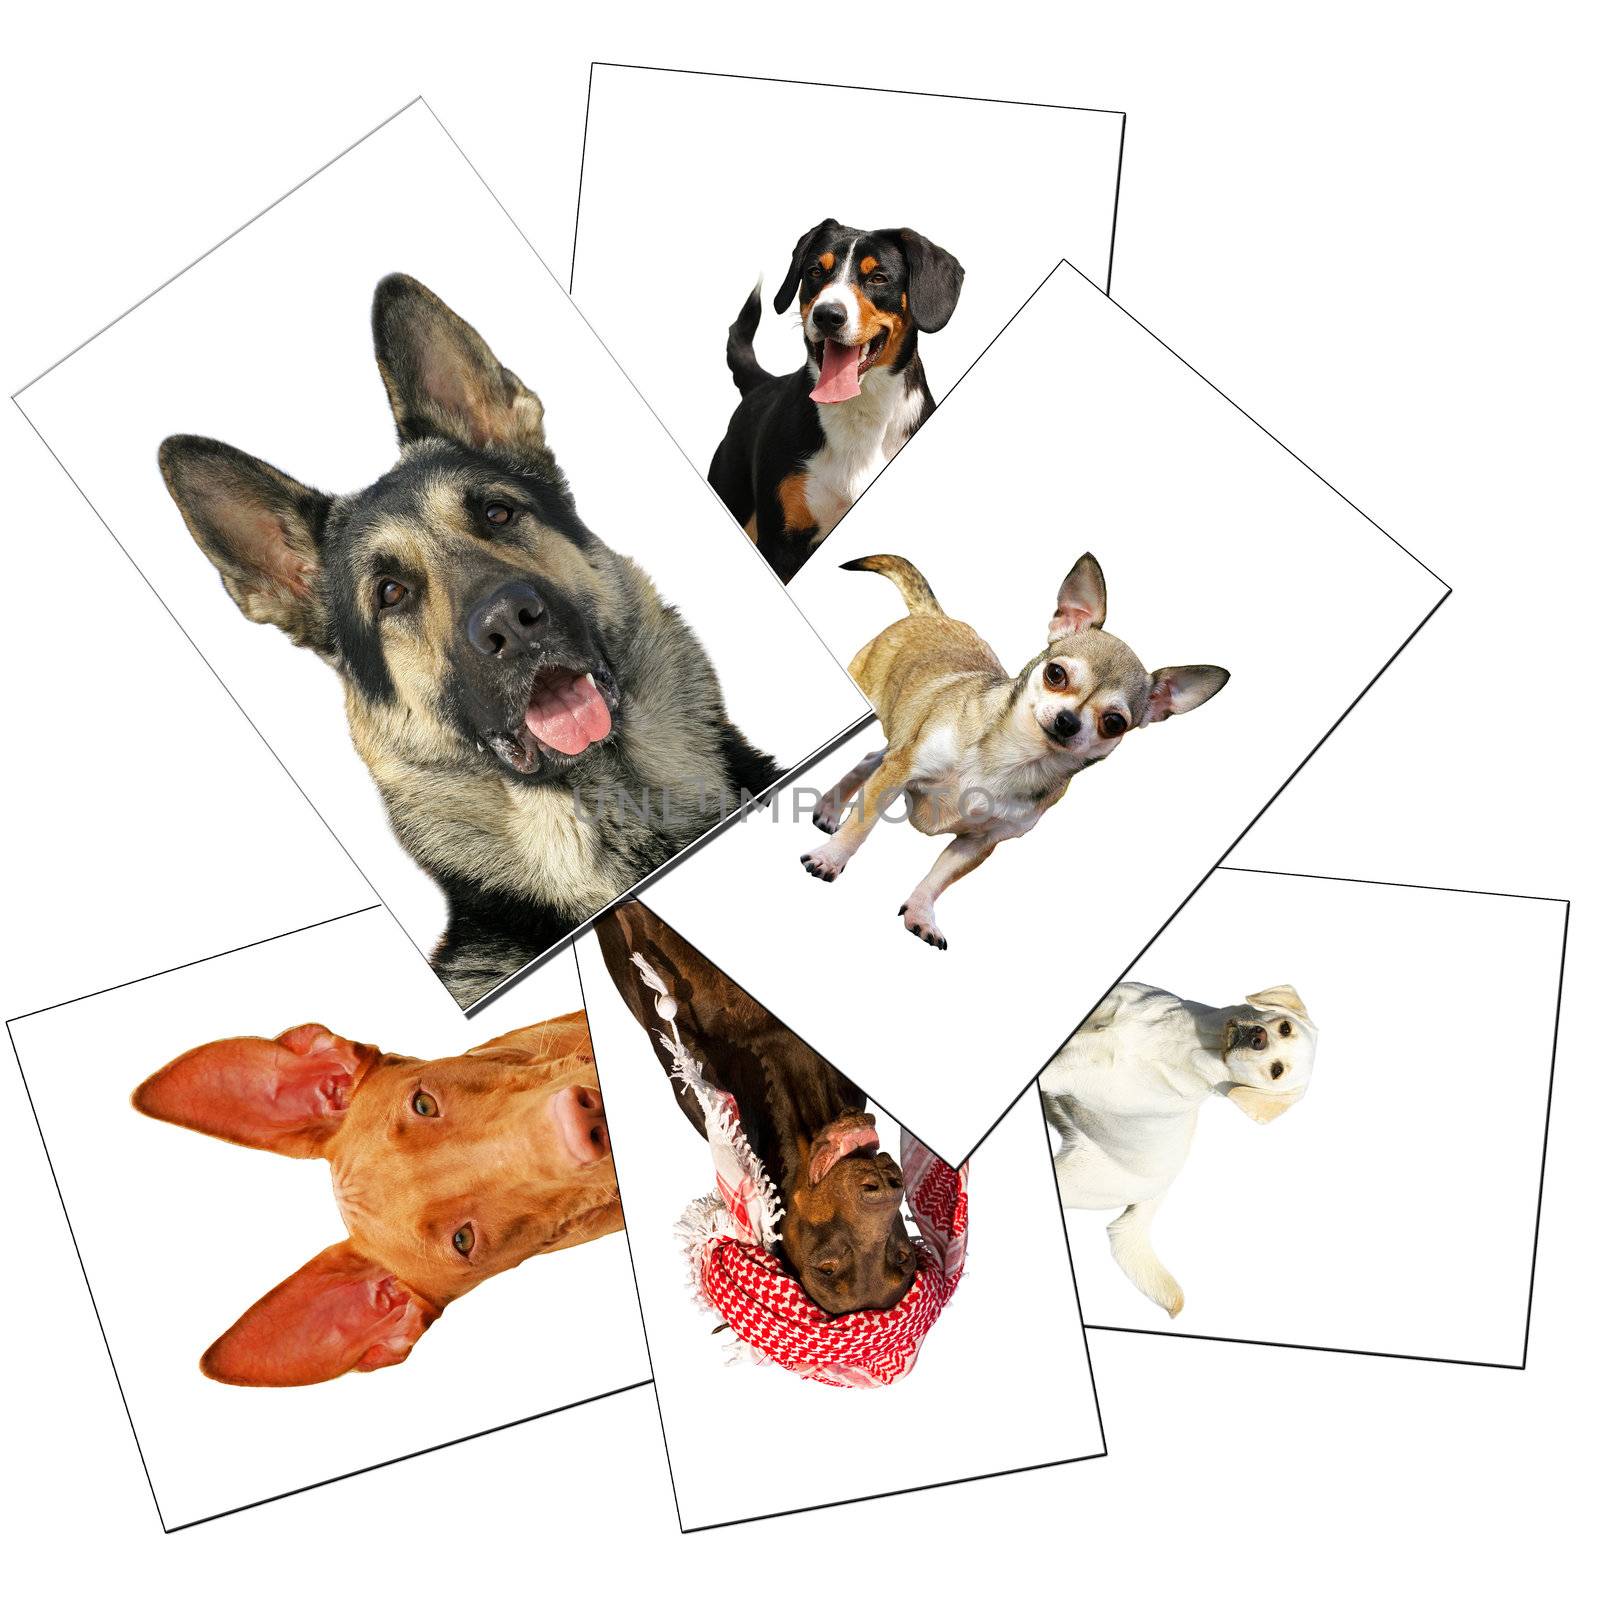 `collection of dogs photos by gsdonlin